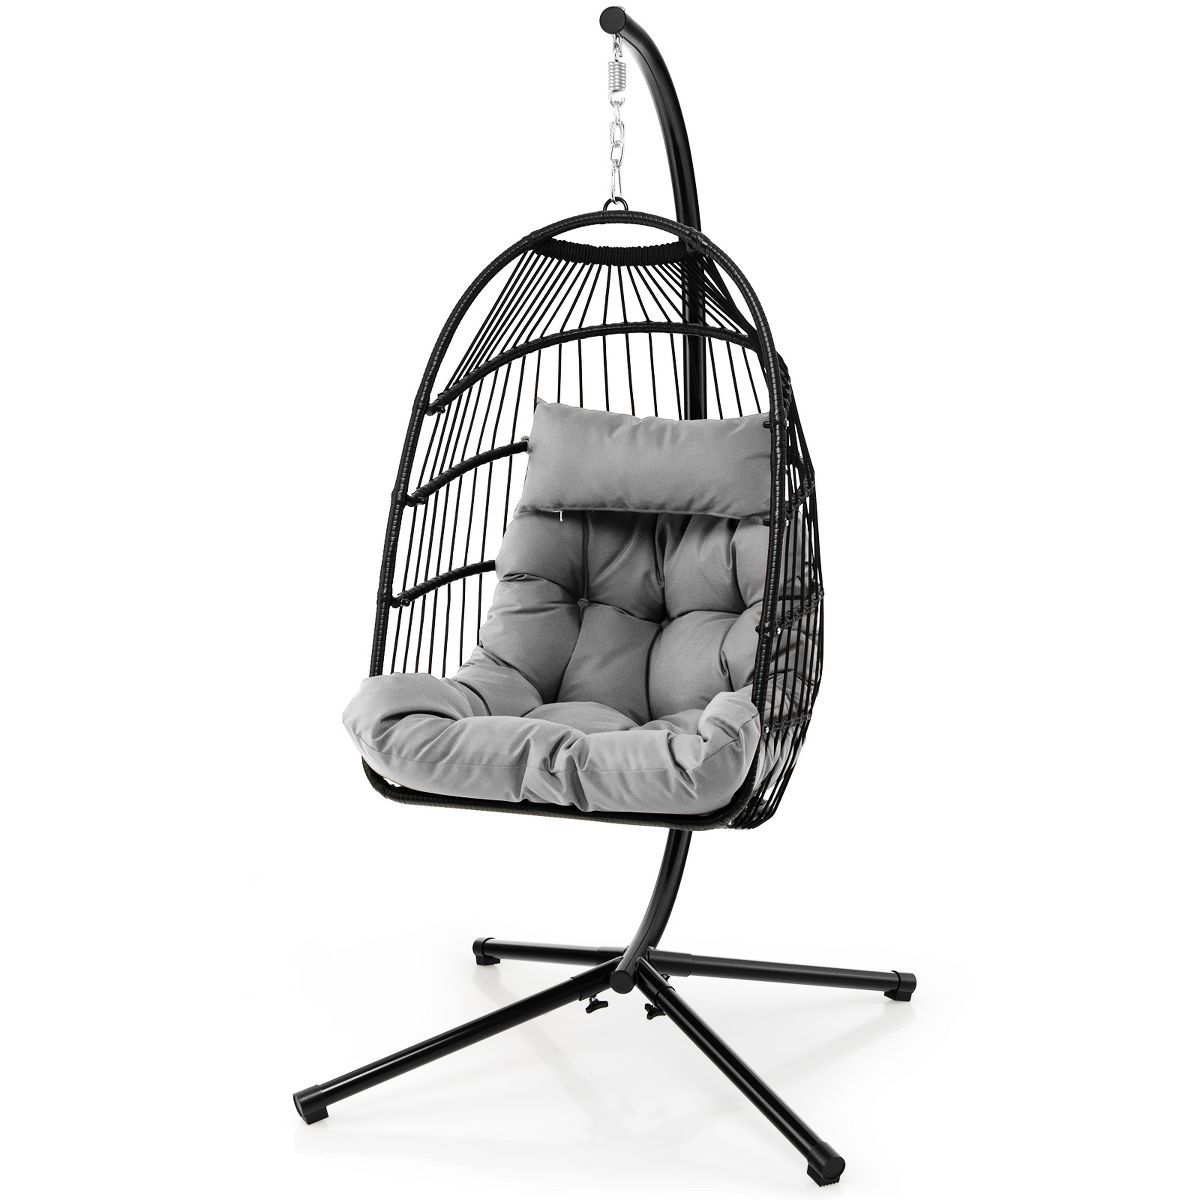 Tangkula Swing Egg Chair Hanging Basket Chair w/Stand Waterproof Cover & Cushion | Target